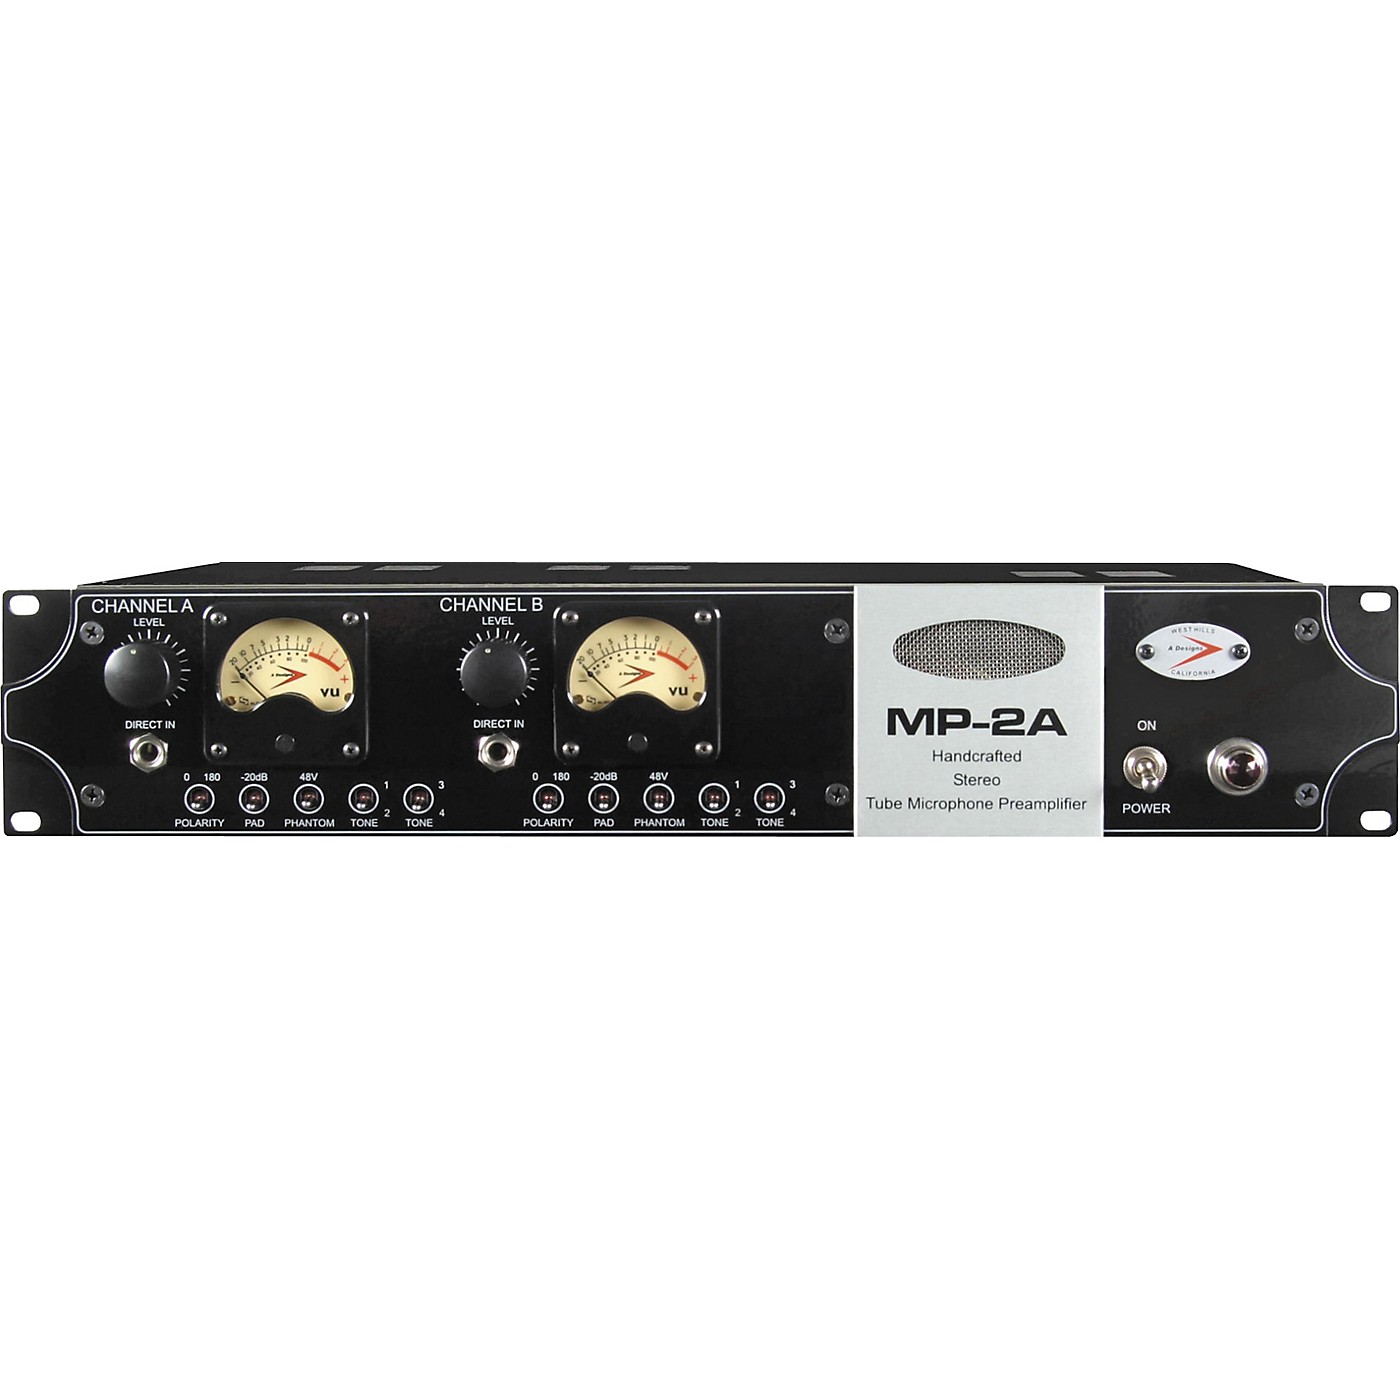 A Designs MP-2A Stereo Tube Microphone Preamplifier thumbnail